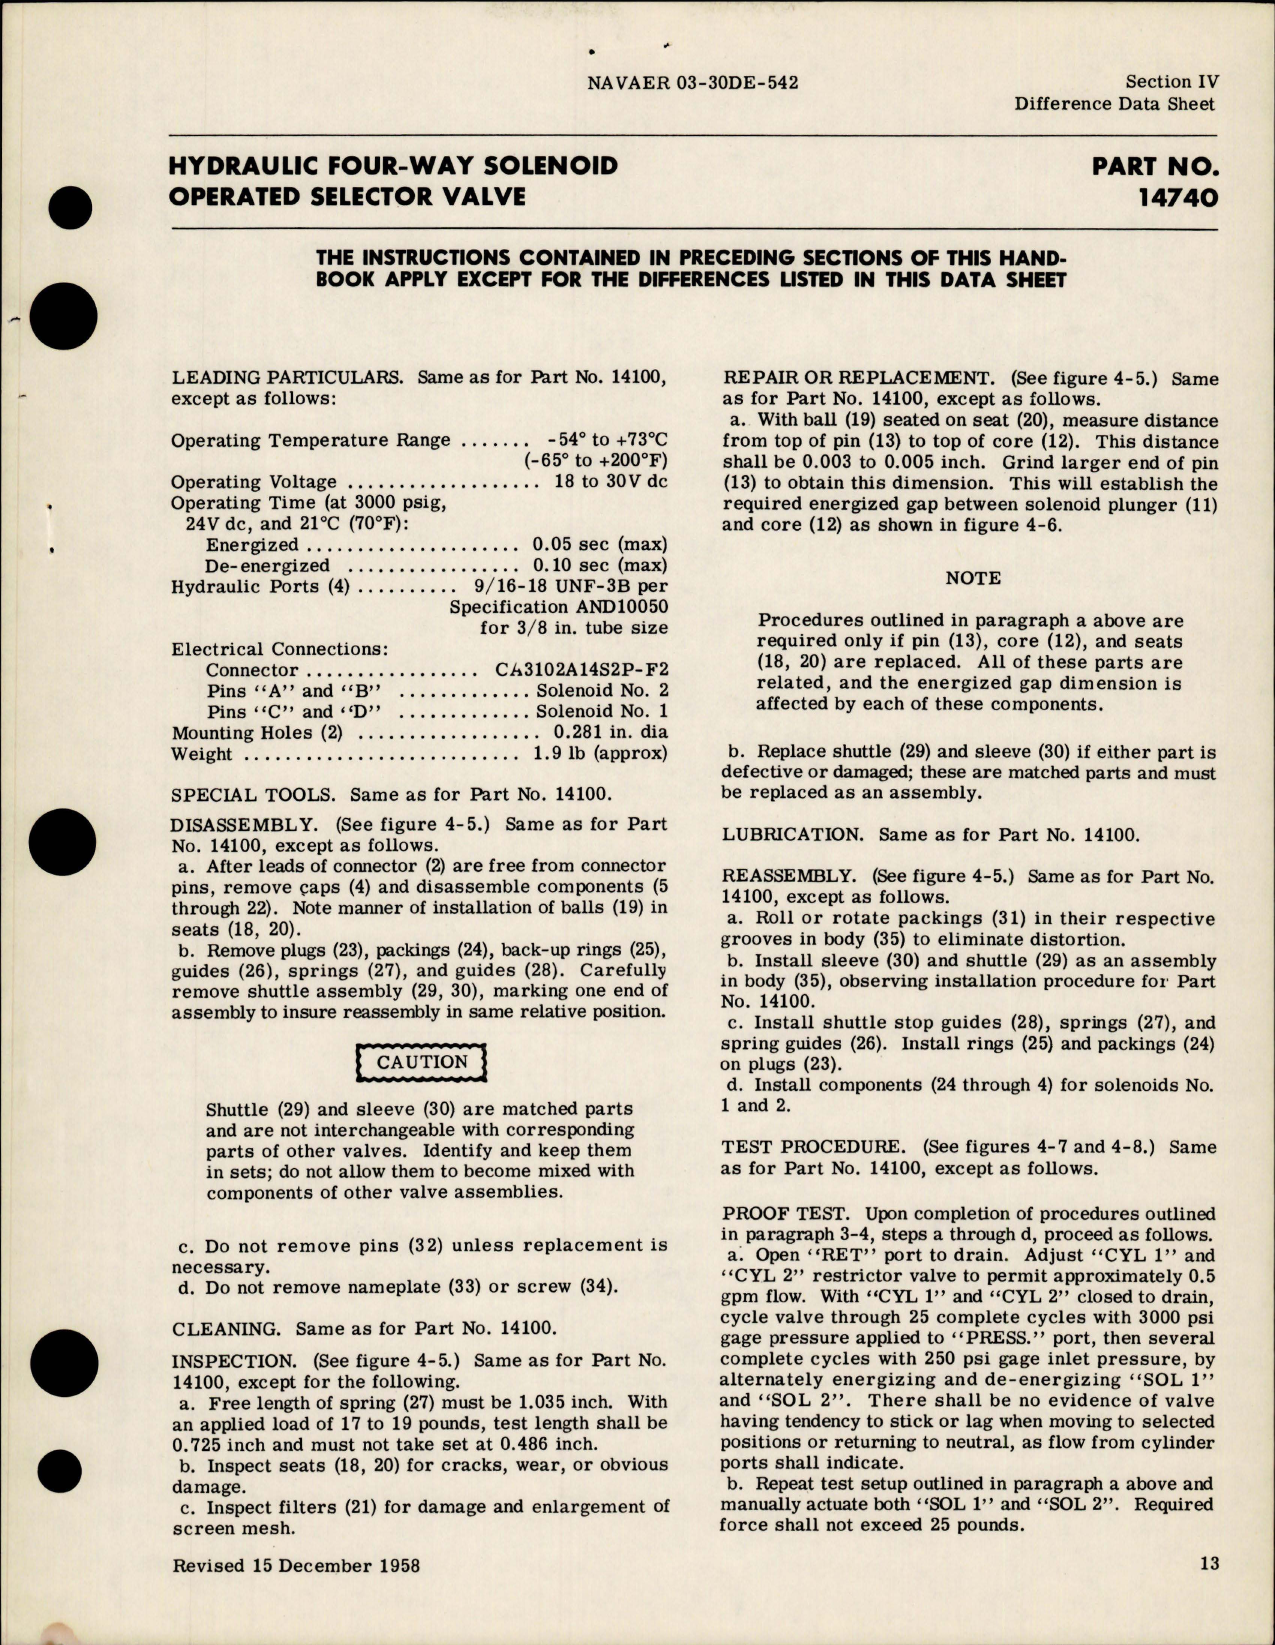 Sample page 5 from AirCorps Library document: Overhaul Instructions for Hydraulic Four-Way Solenoid Operated Selector Valves - Parts 14100, 14740 and 15130